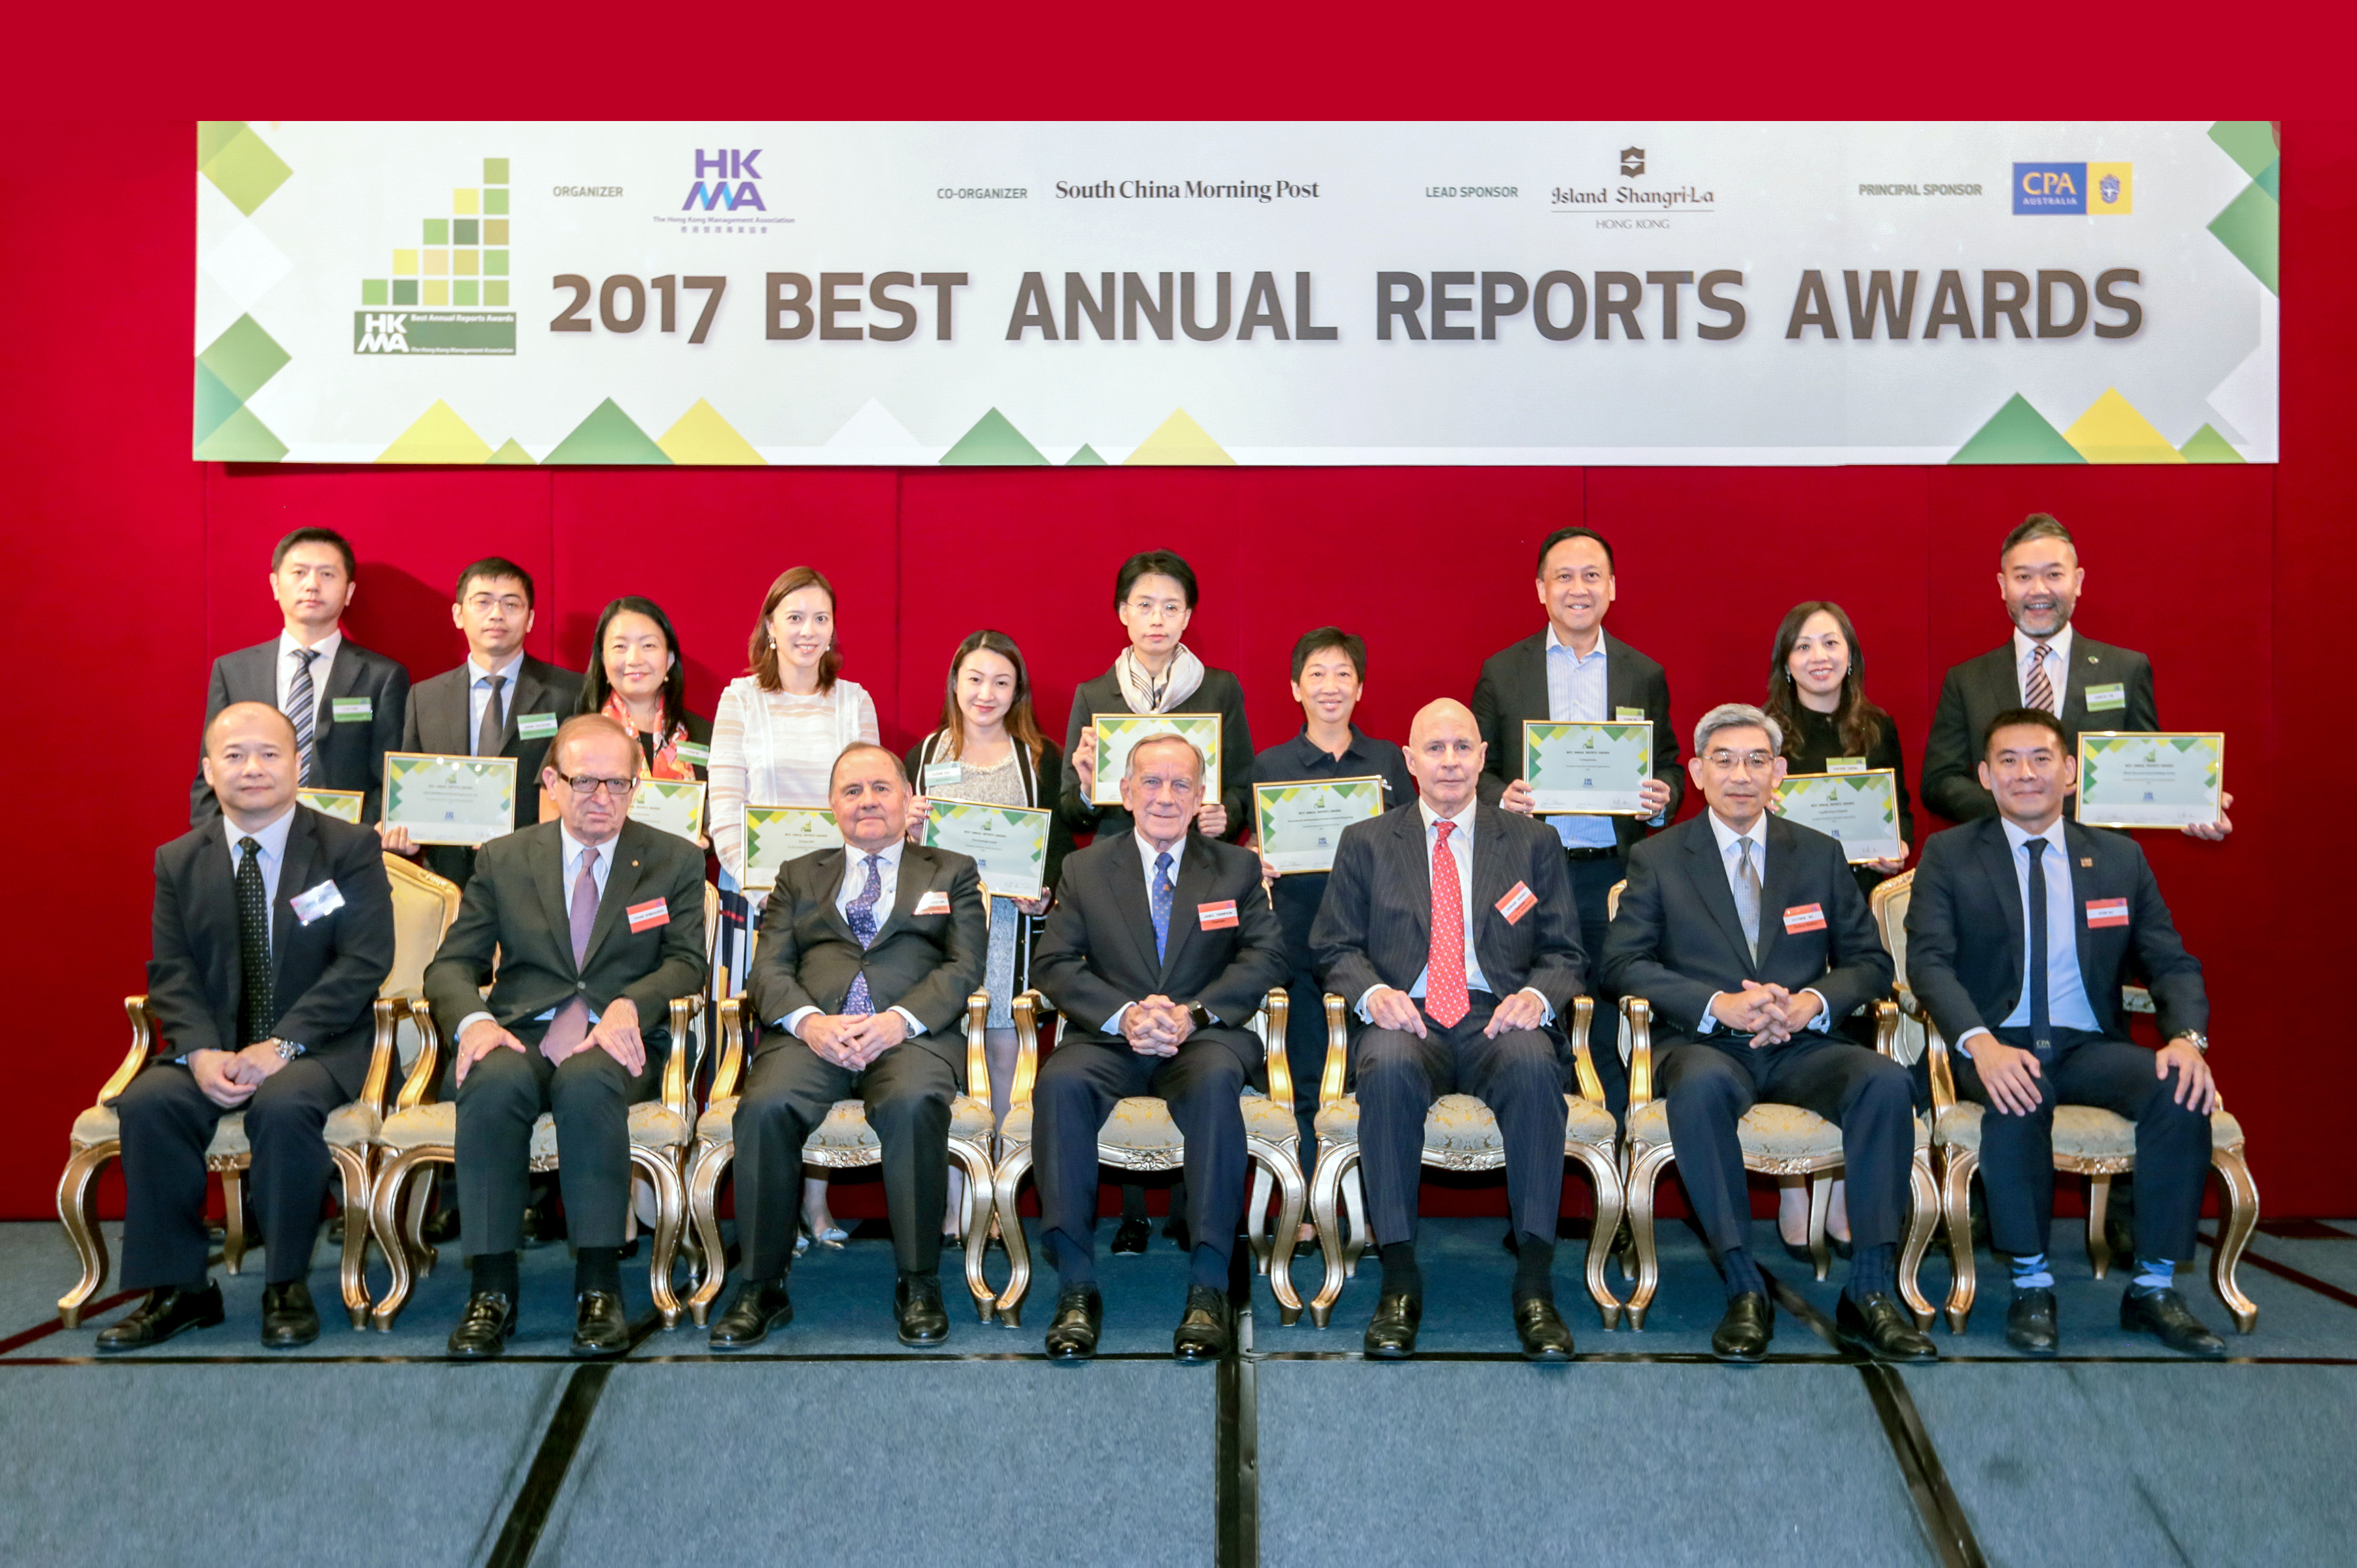 Best Annual Reports Awards